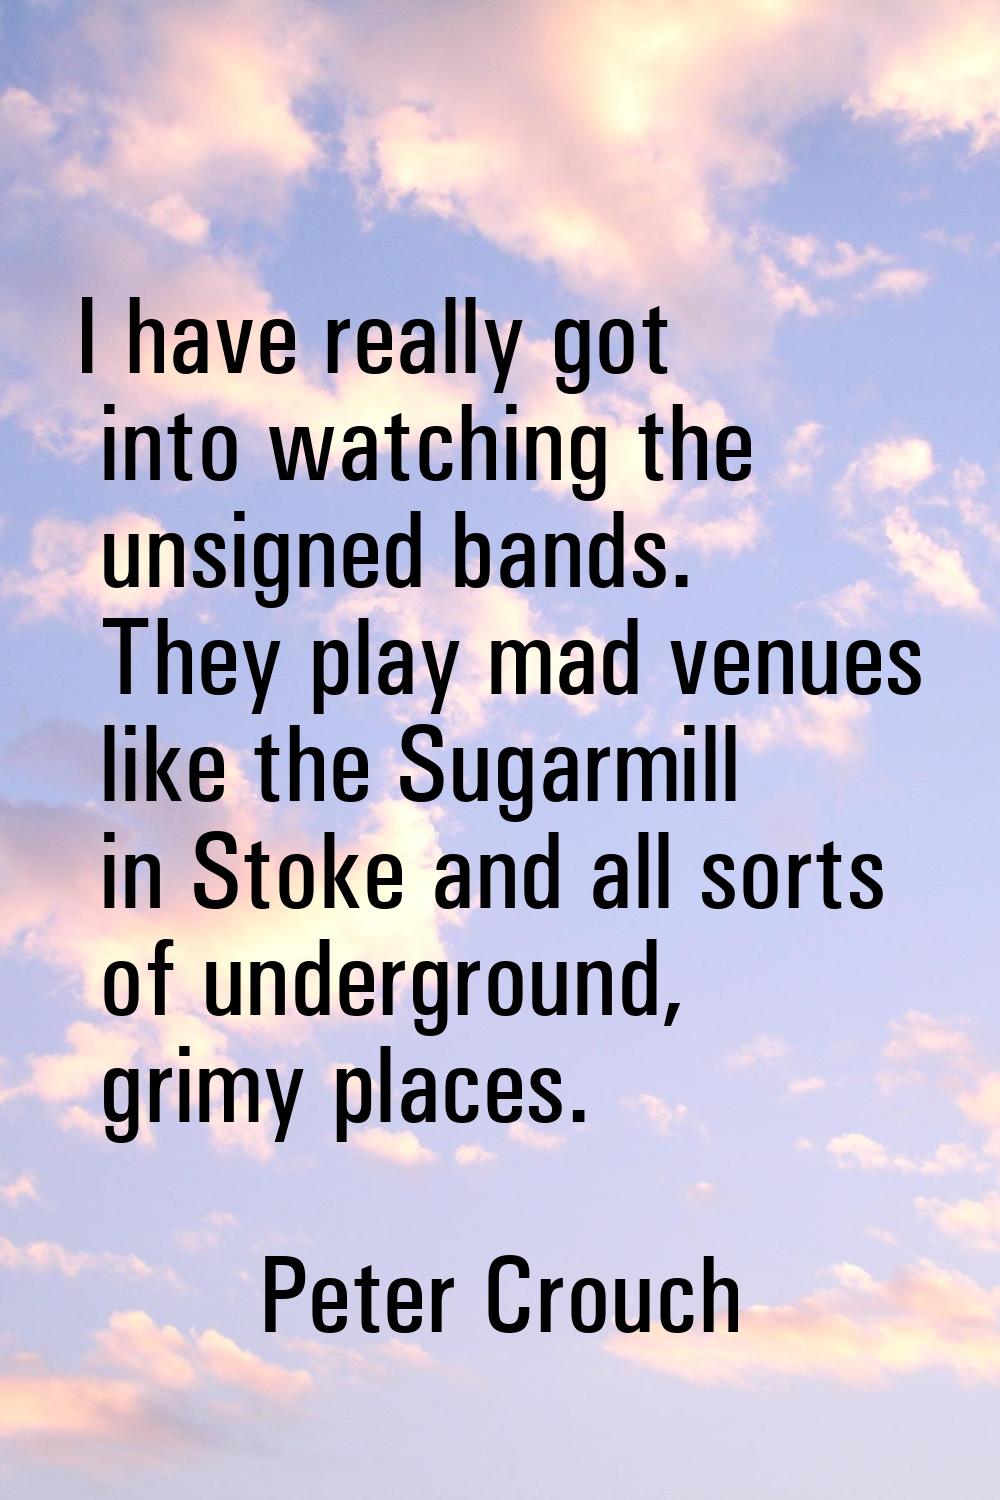 I have really got into watching the unsigned bands. They play mad venues like the Sugarmill in Stok